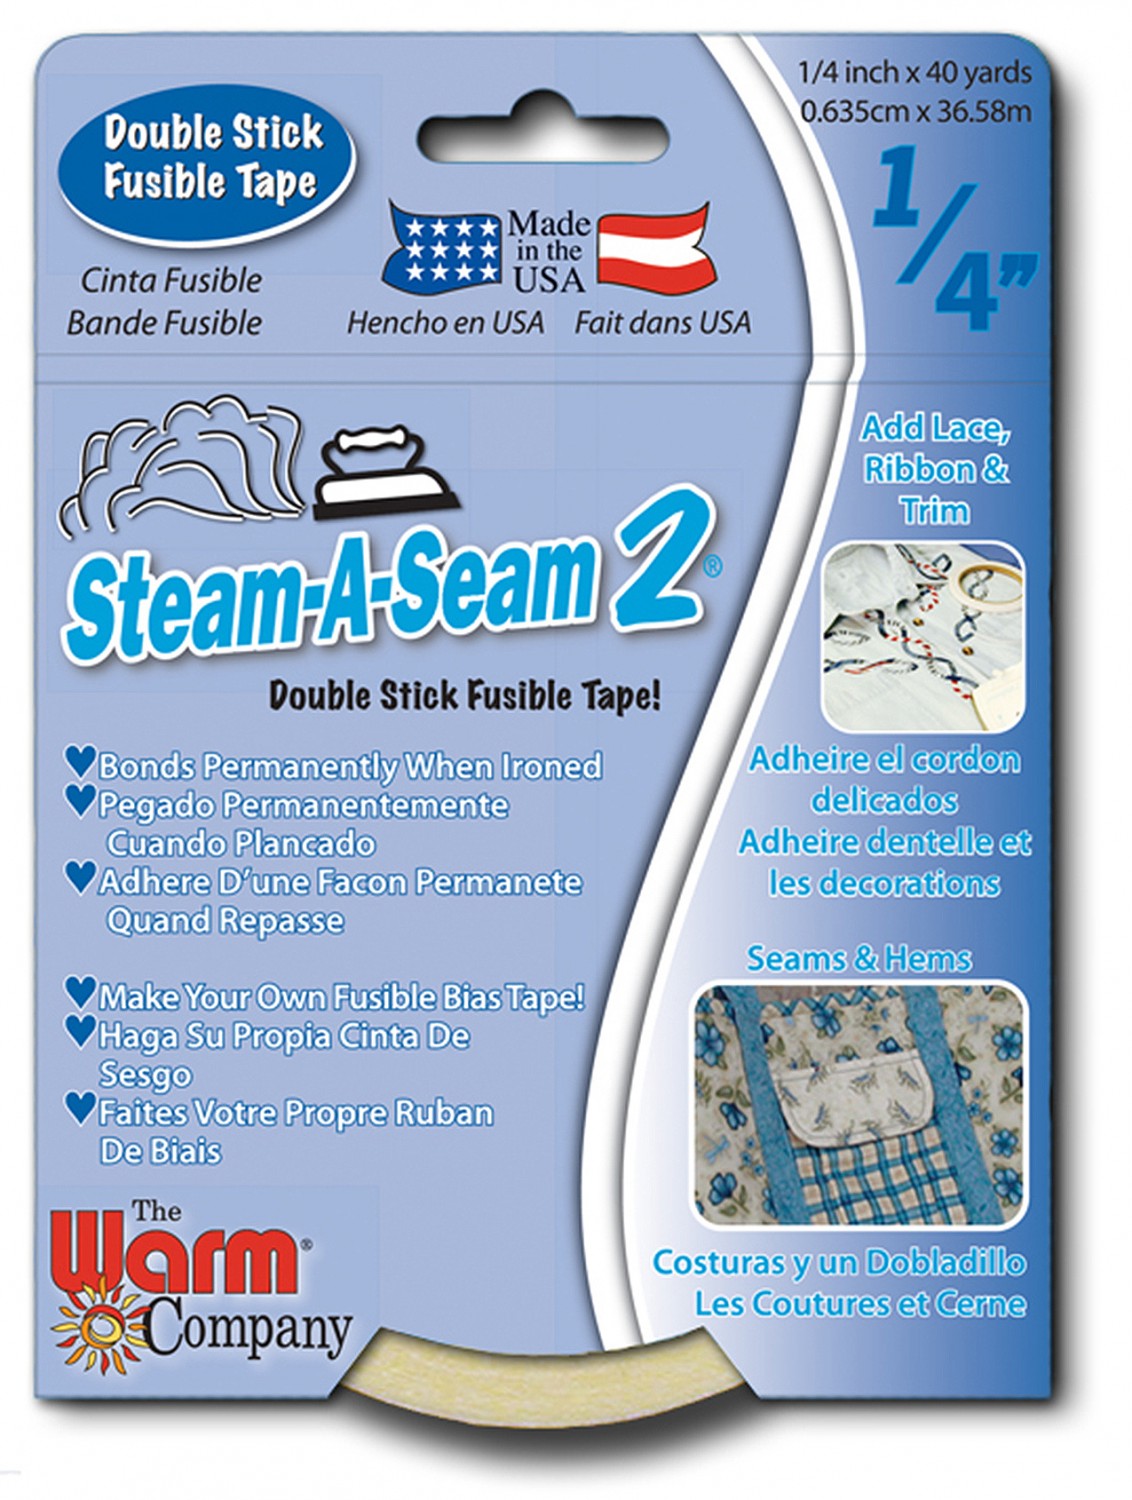 Steam-A-Seam 2  Double Stick Fusible Tape 1/4in x 40yds from Warm Company